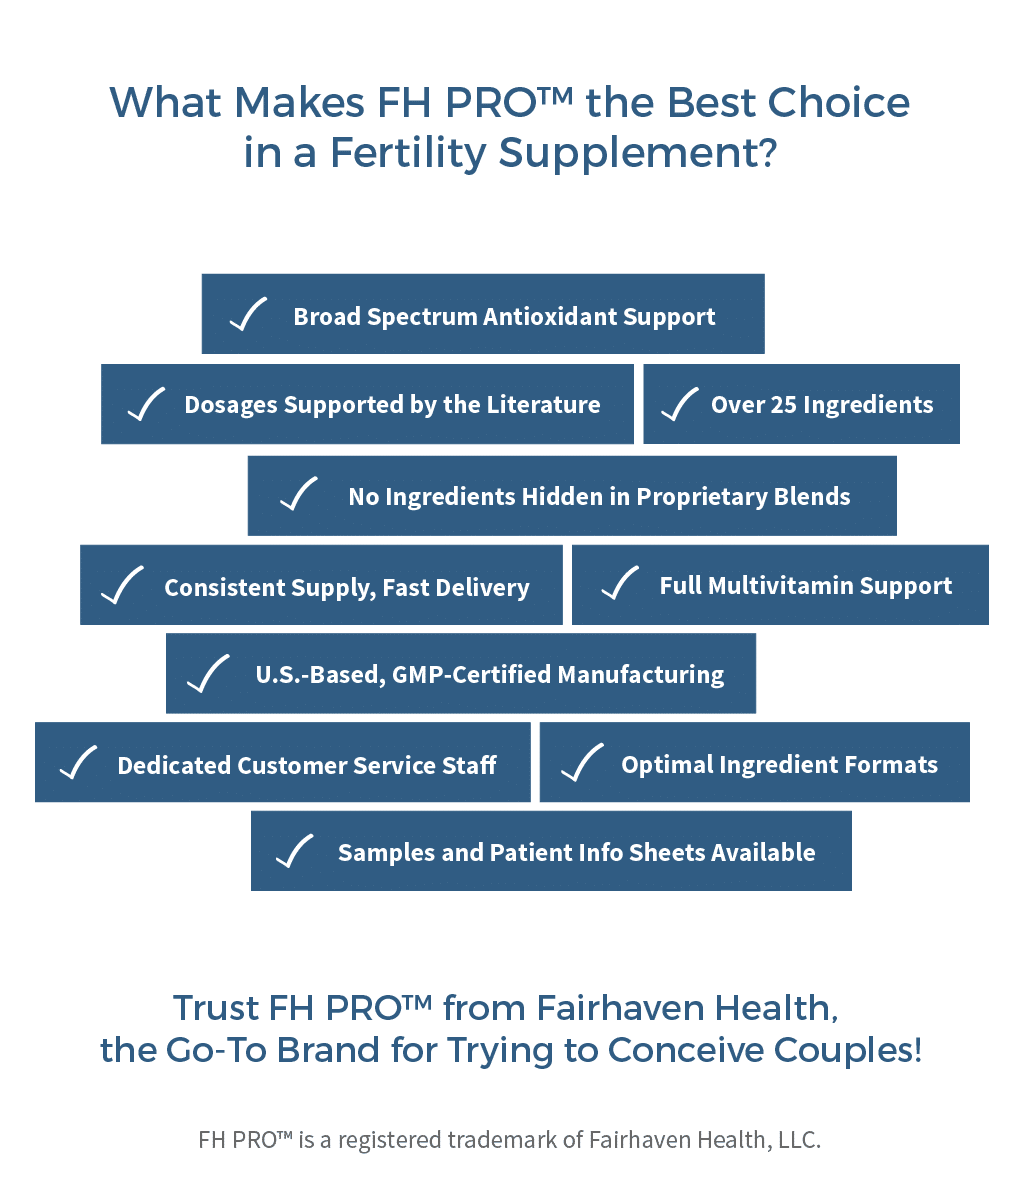 What Makes FH PRO the Best Choice in a Fertility Supplement?